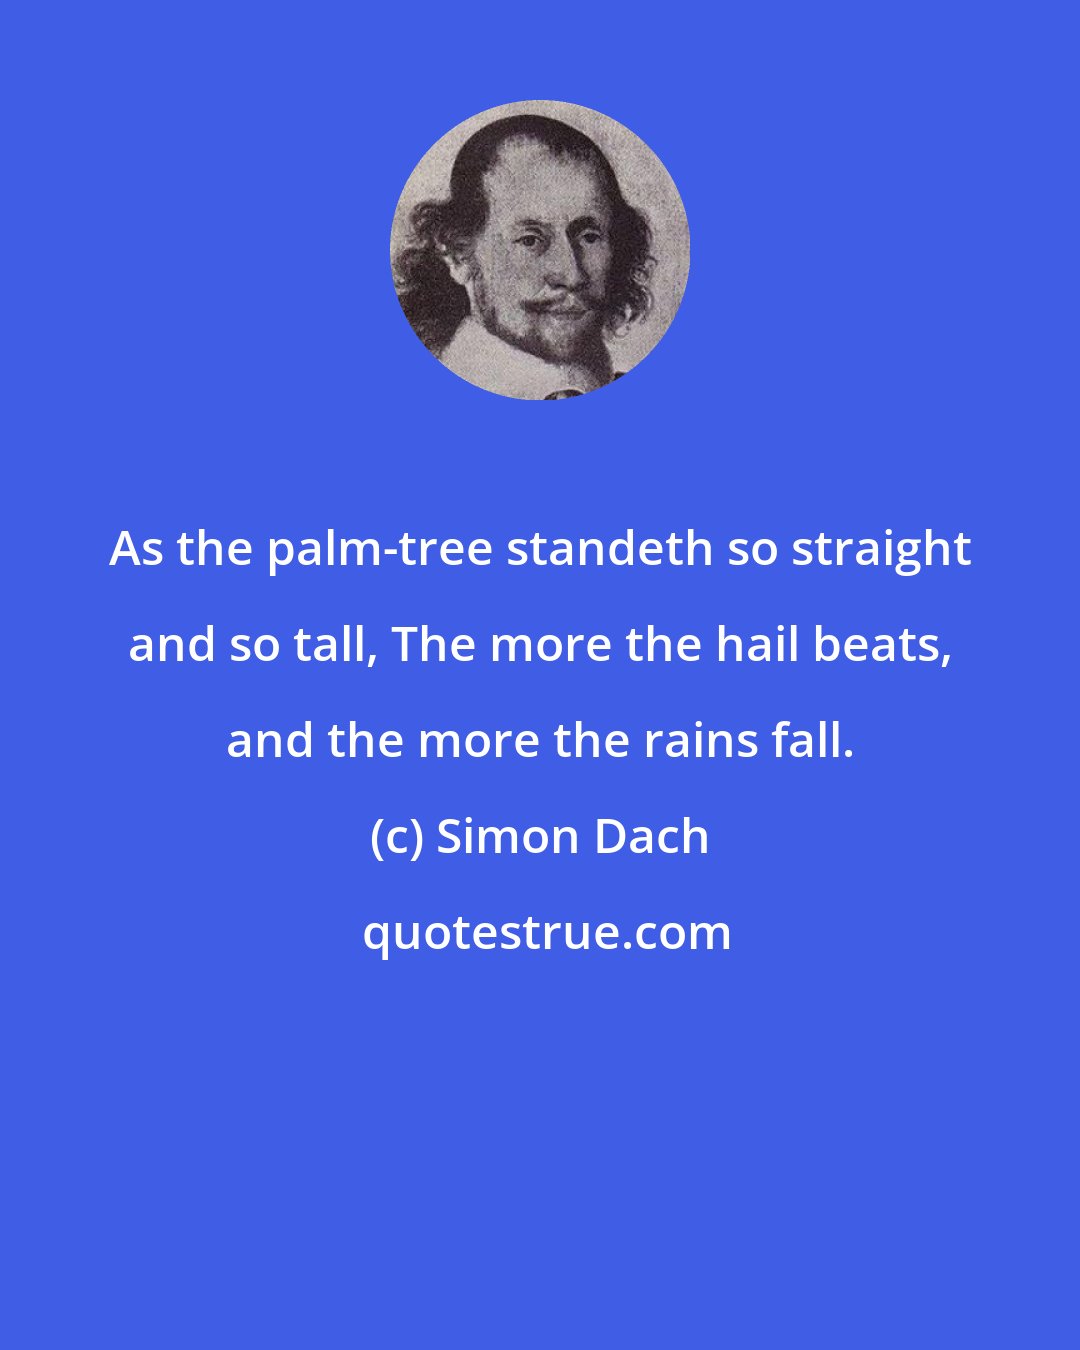 Simon Dach: As the palm-tree standeth so straight and so tall, The more the hail beats, and the more the rains fall.